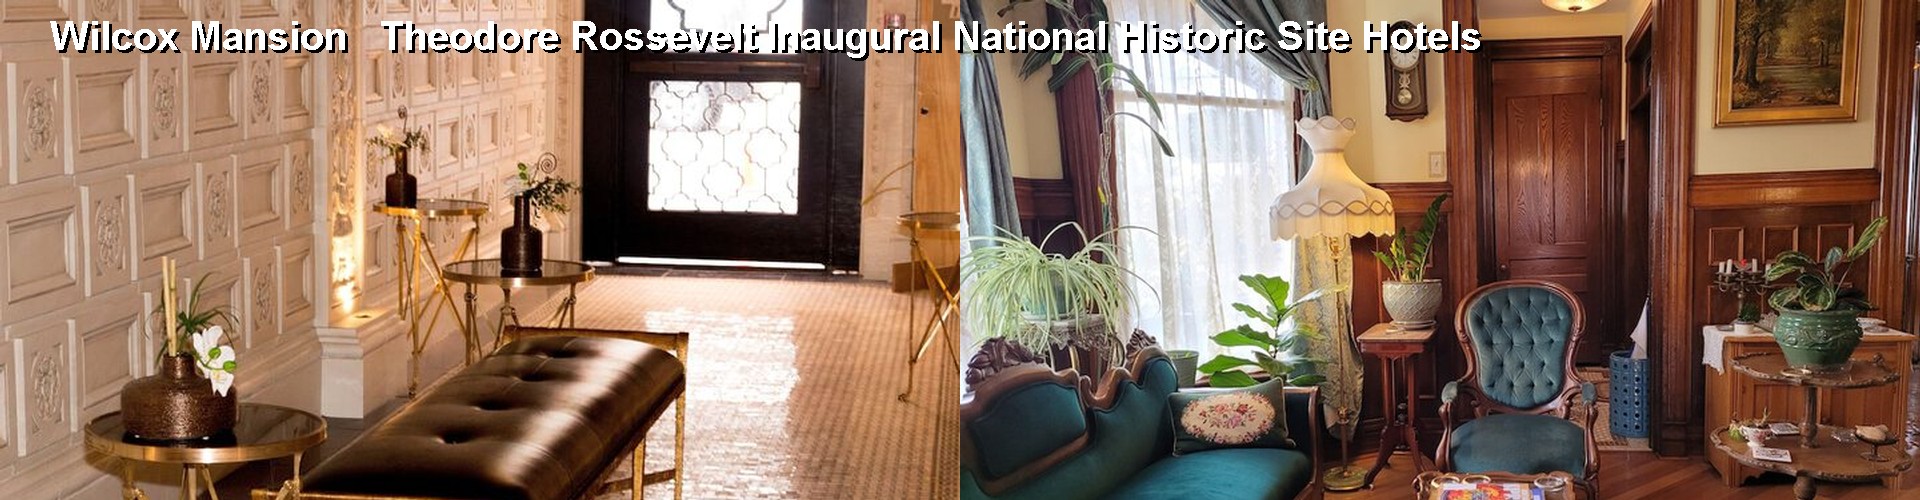 5 Best Hotels near Wilcox Mansion   Theodore Rossevelt Inaugural National Historic Site